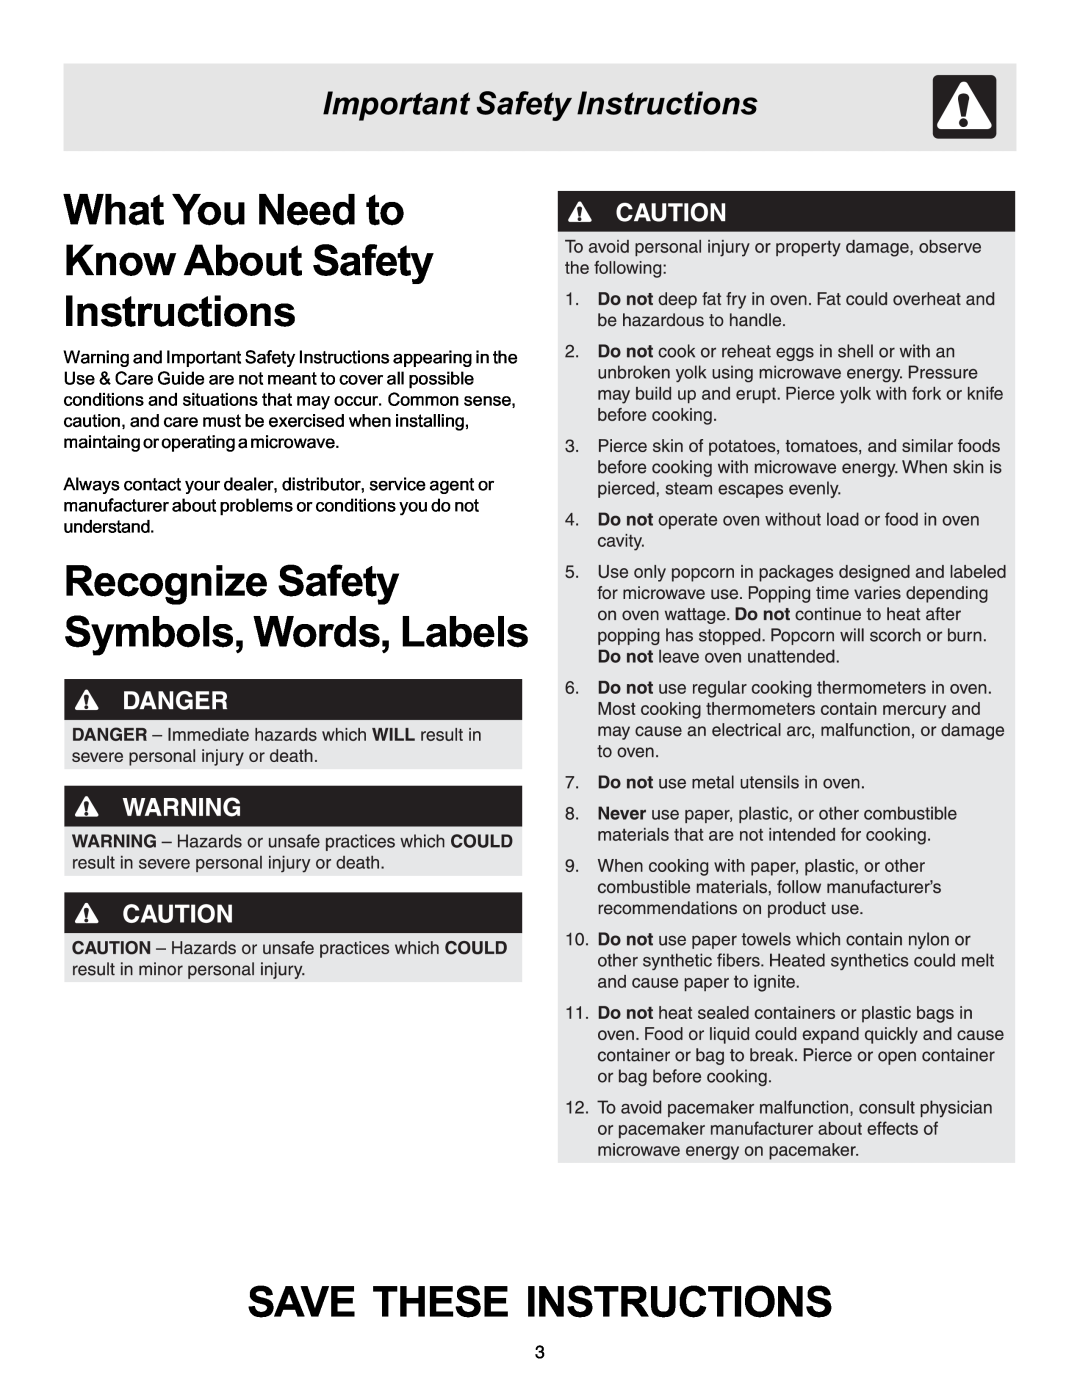 Frigidaire 316495002 manual What You Need to Know About Safety Instructions, Recognize Safety Symbols, Words, Labels 